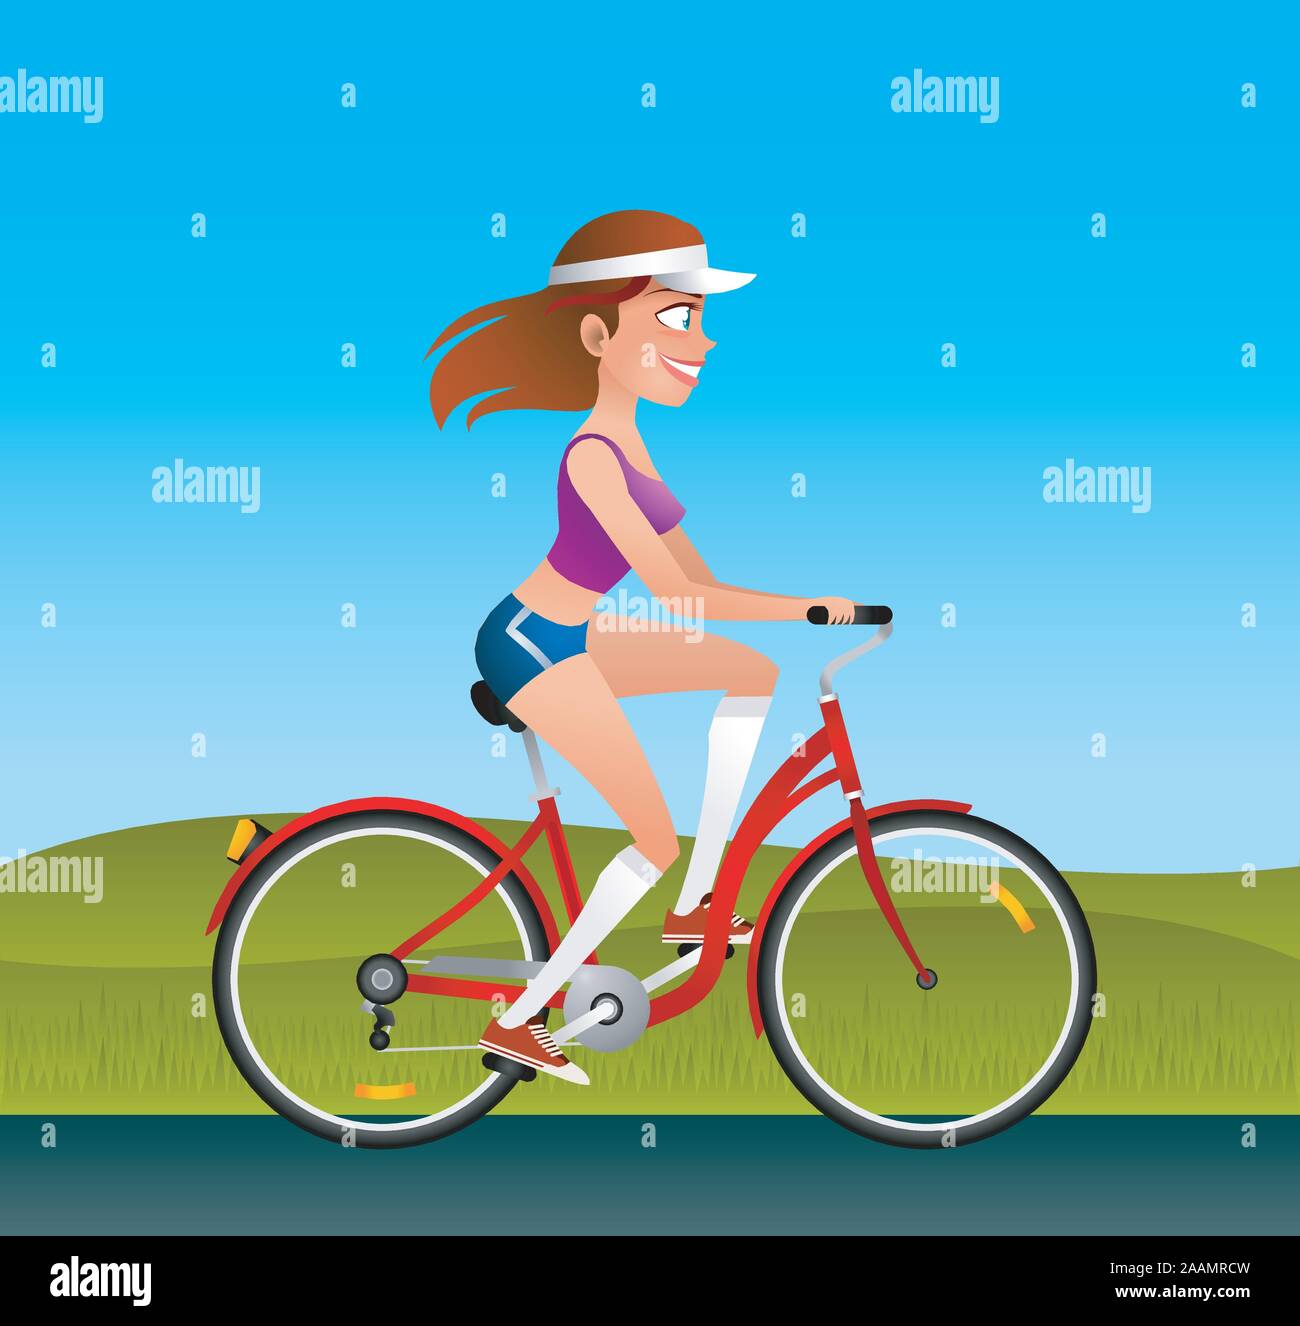 girl riding a bicycle can bu used separatelly from background Stock Vector